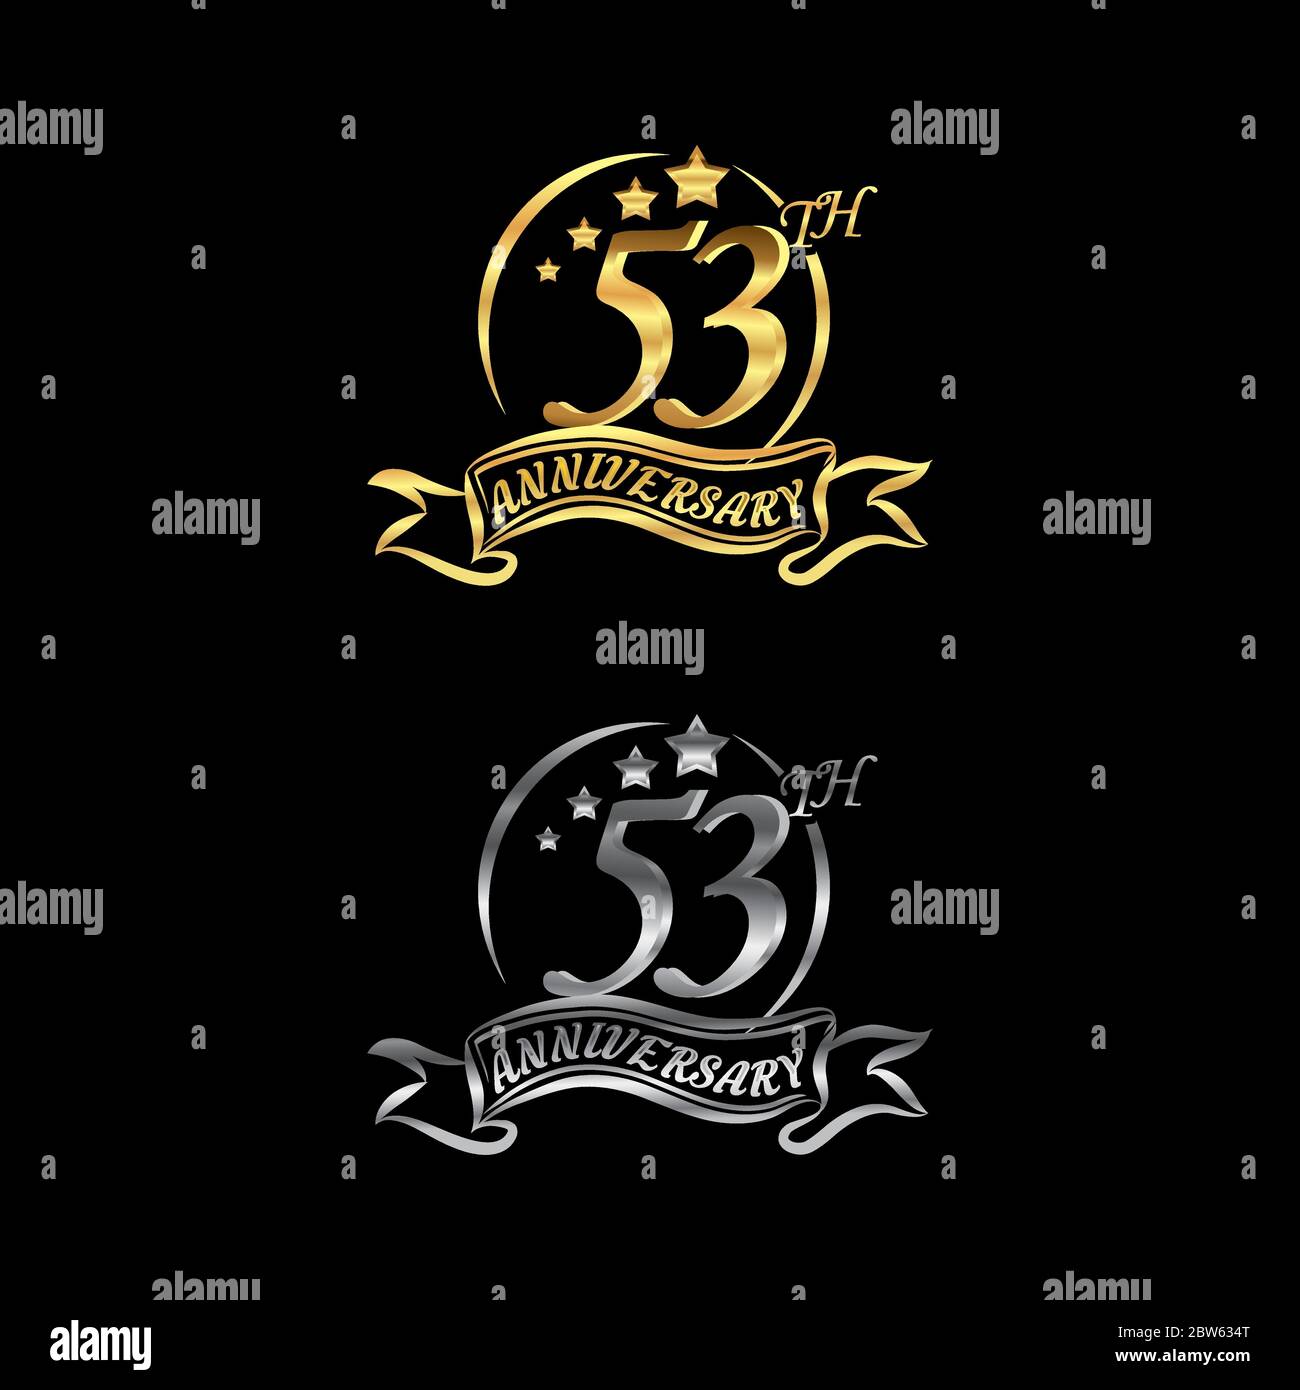 Celebrating the 53th anniversary logo,star shape, with gold and silver rings and gradation ribbons isolated on a black background.EPS 10 Stock Vector